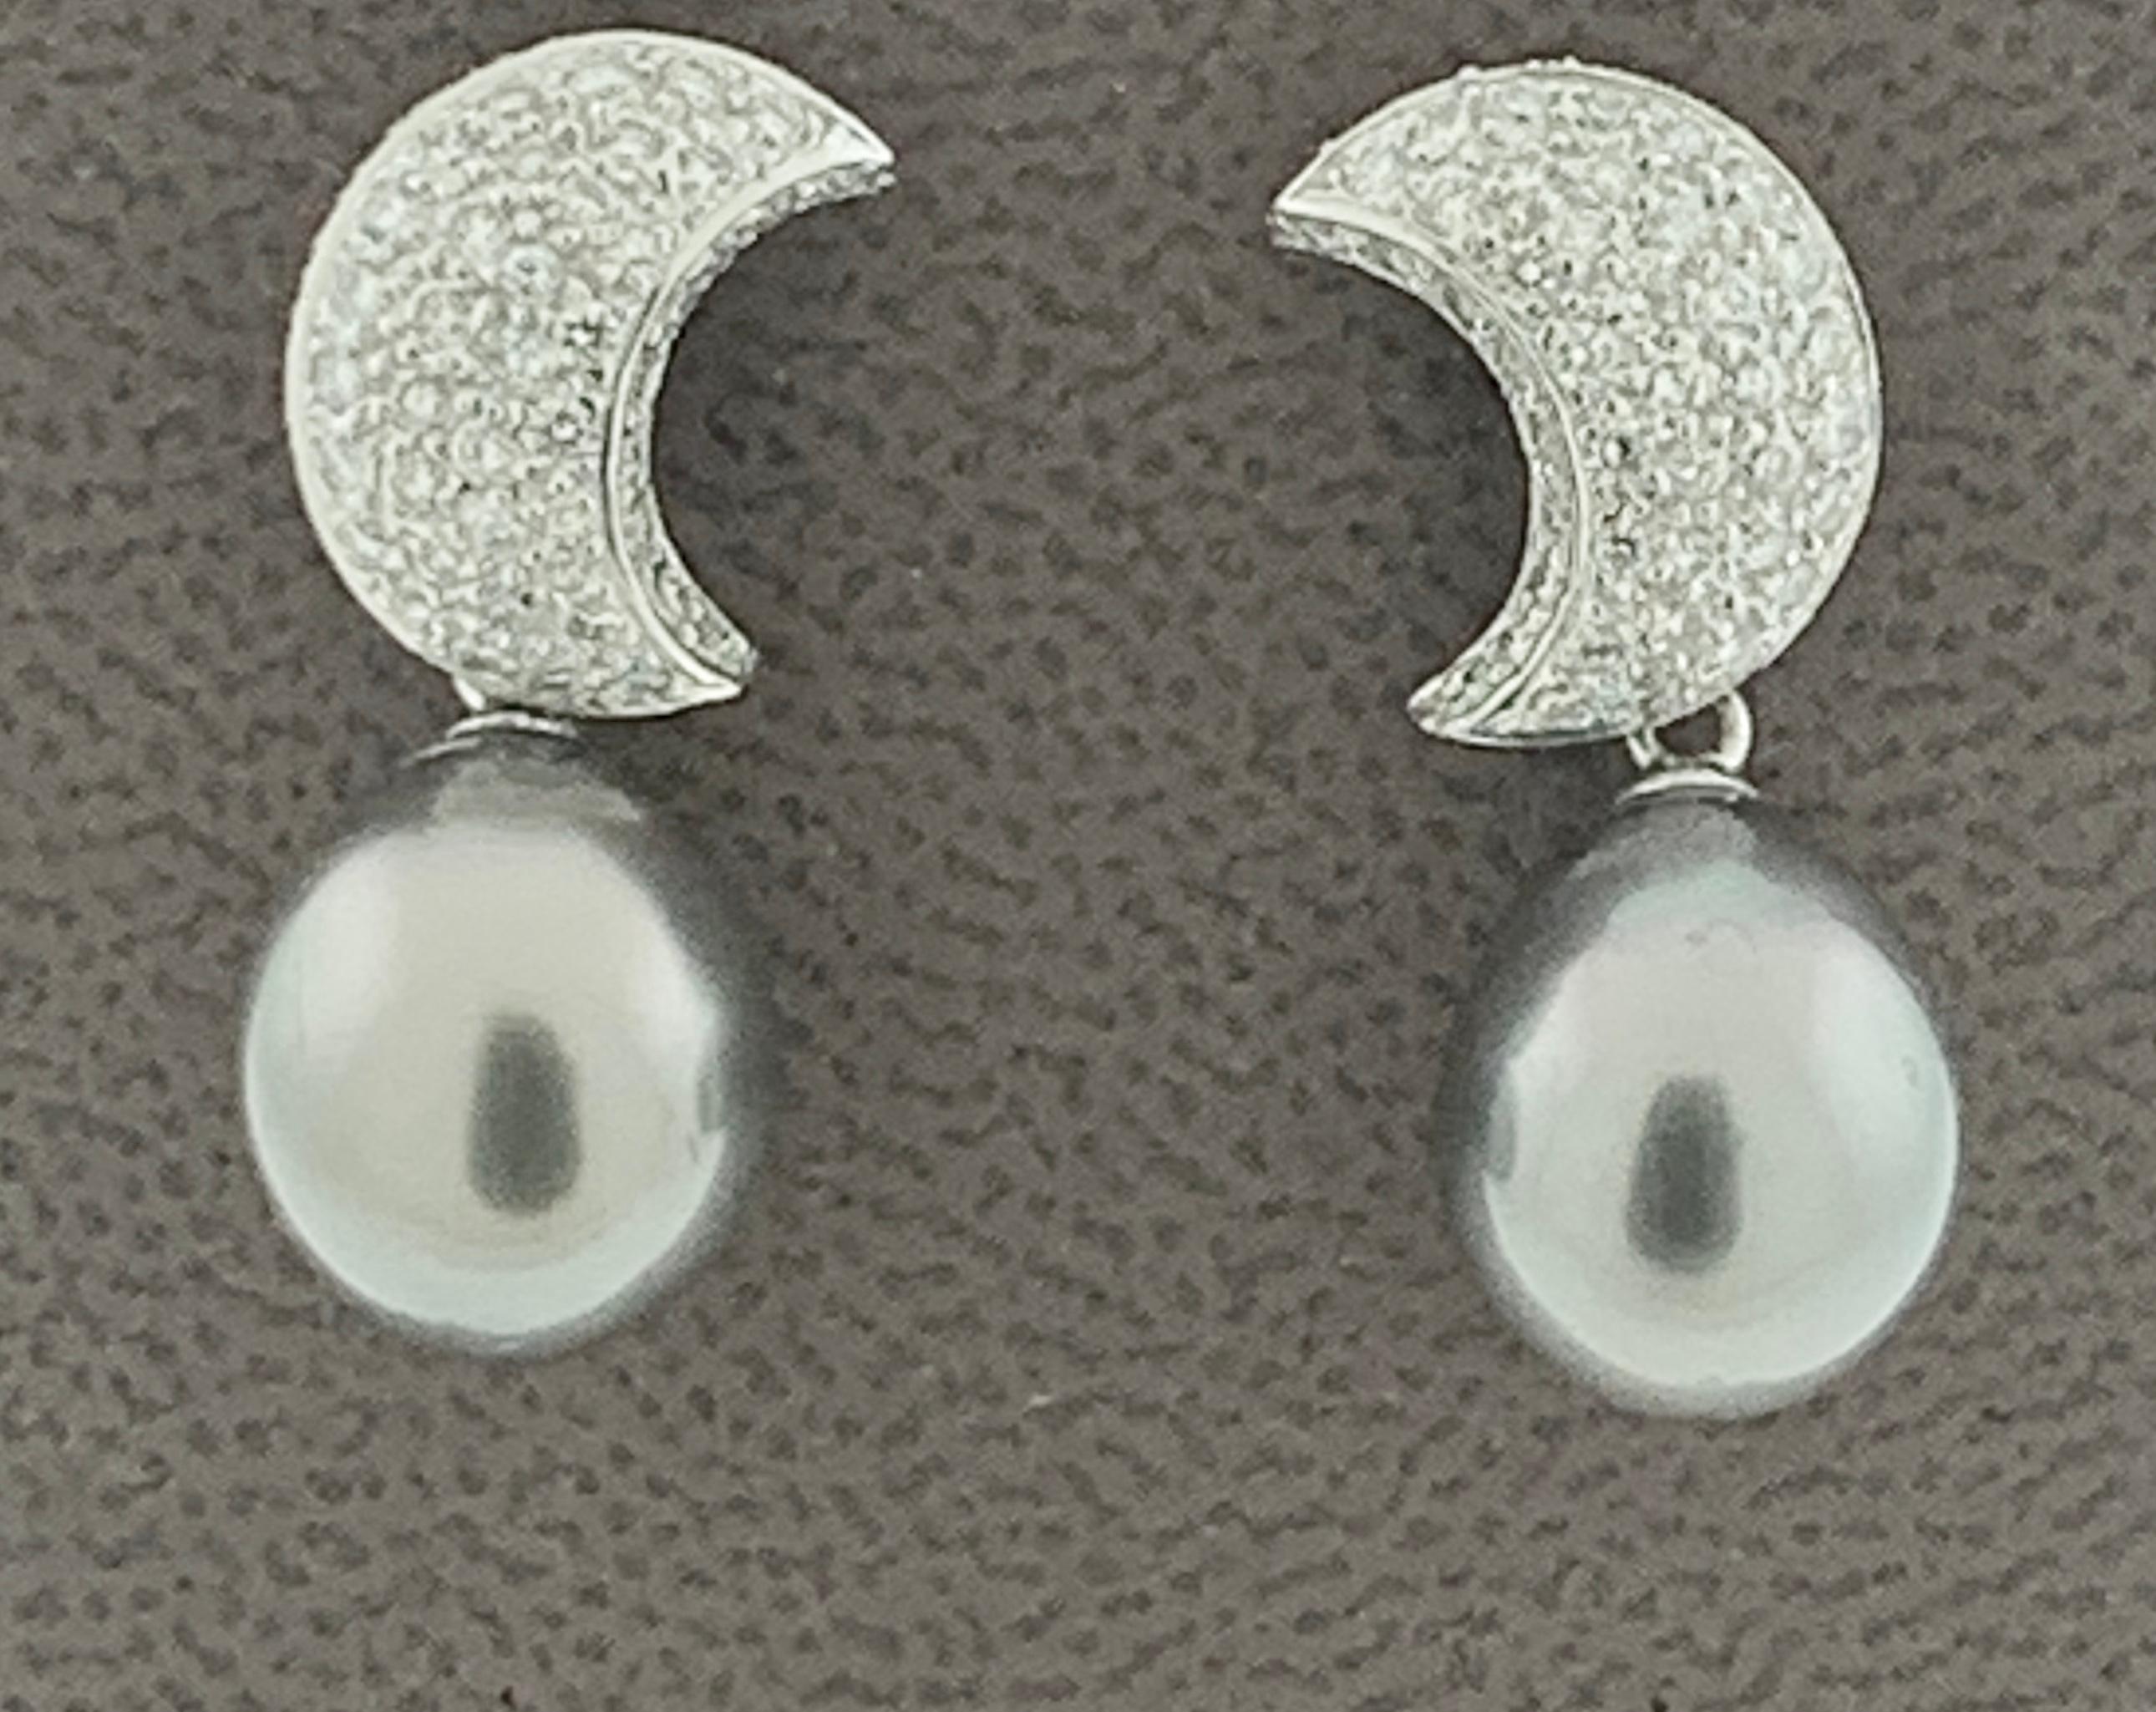 Grey Black Tahitian Cocktail Dangling Earrings with Diamonds 18 Karat White Gold In Excellent Condition For Sale In New York, NY